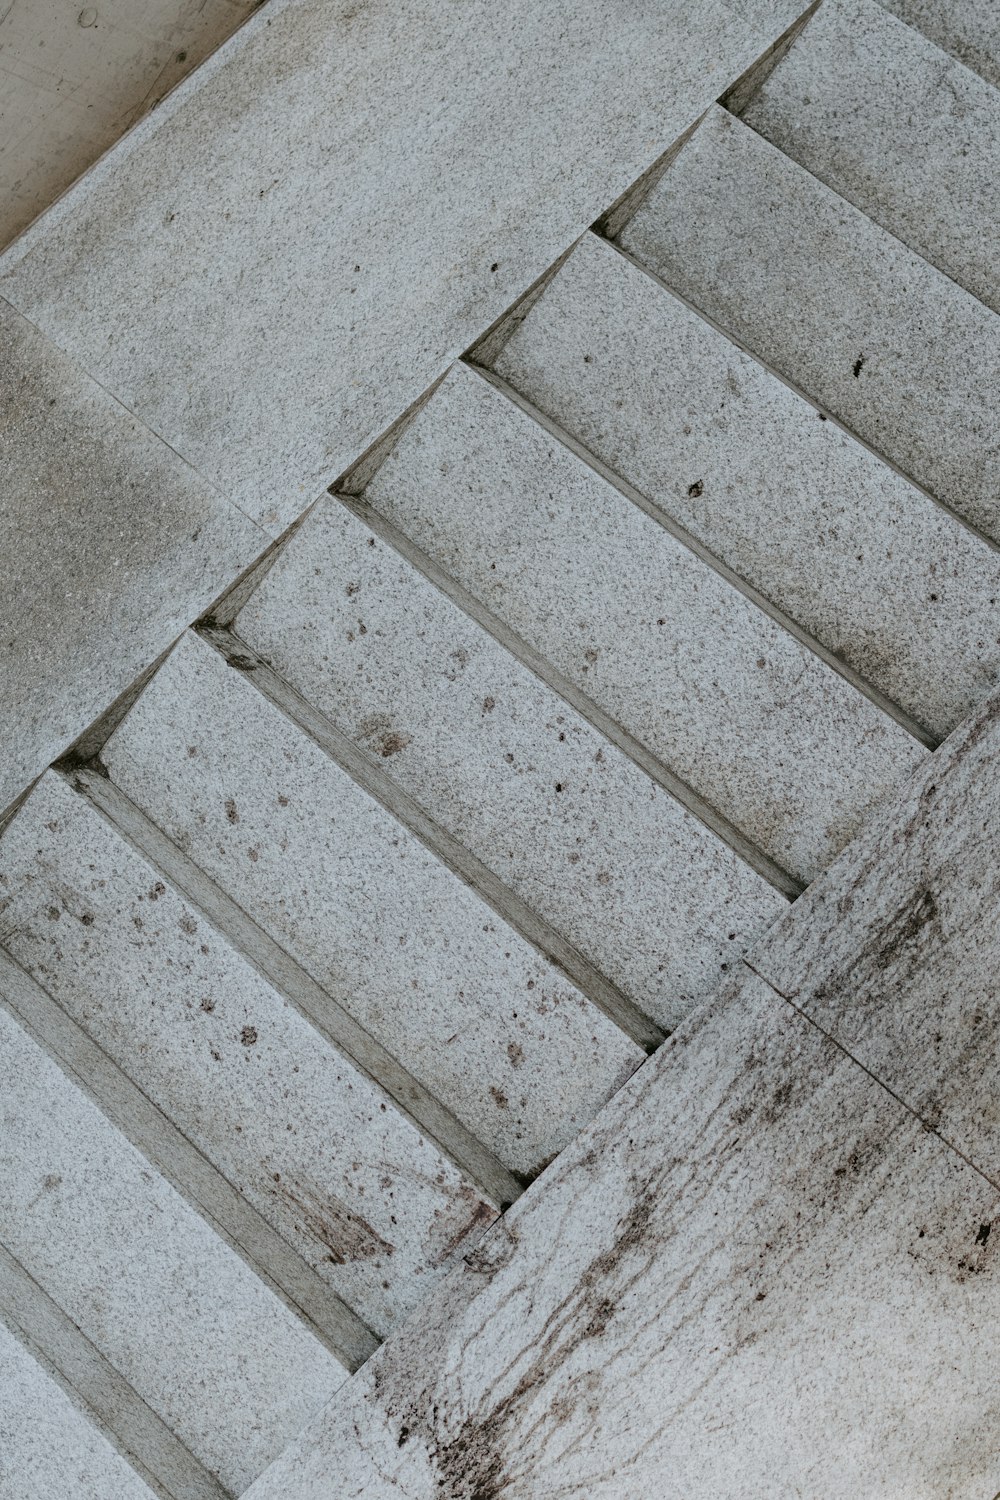 white concrete stairs during daytime